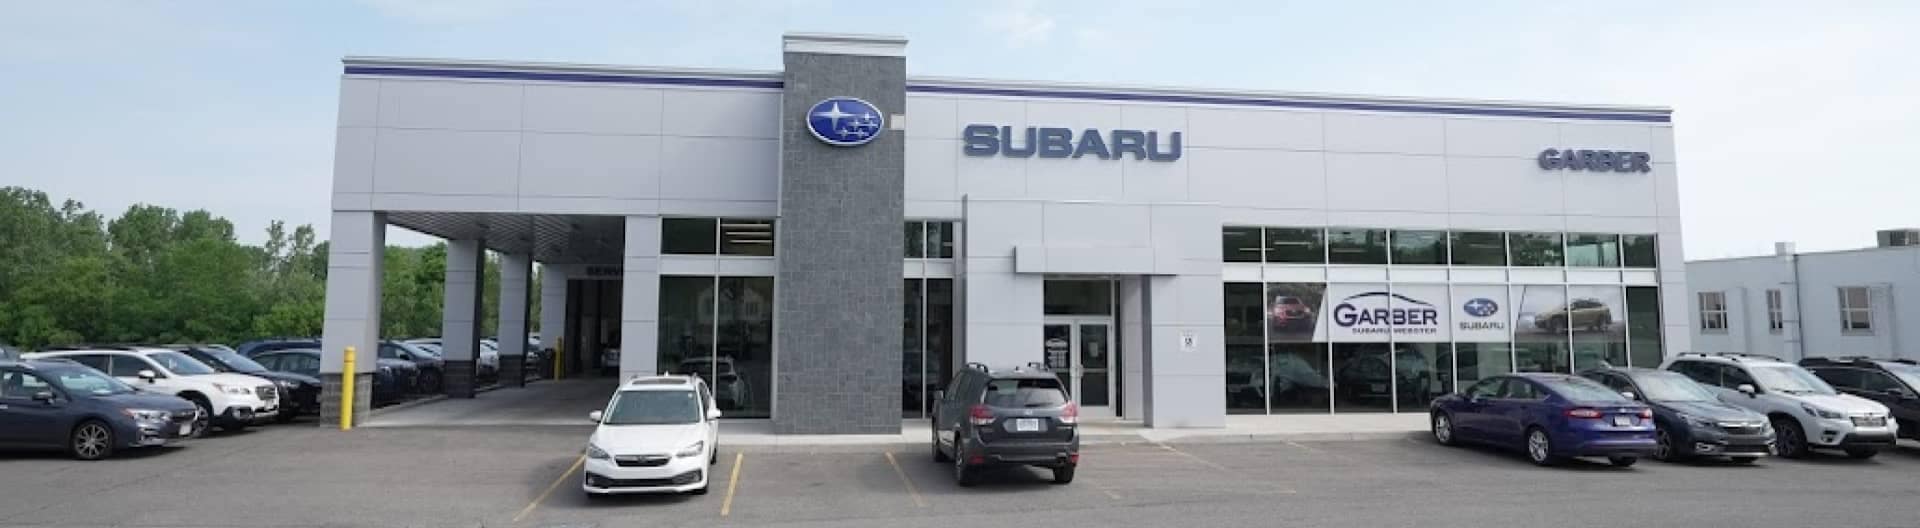 Outside of Garber Subaru Rochester dealership during the day